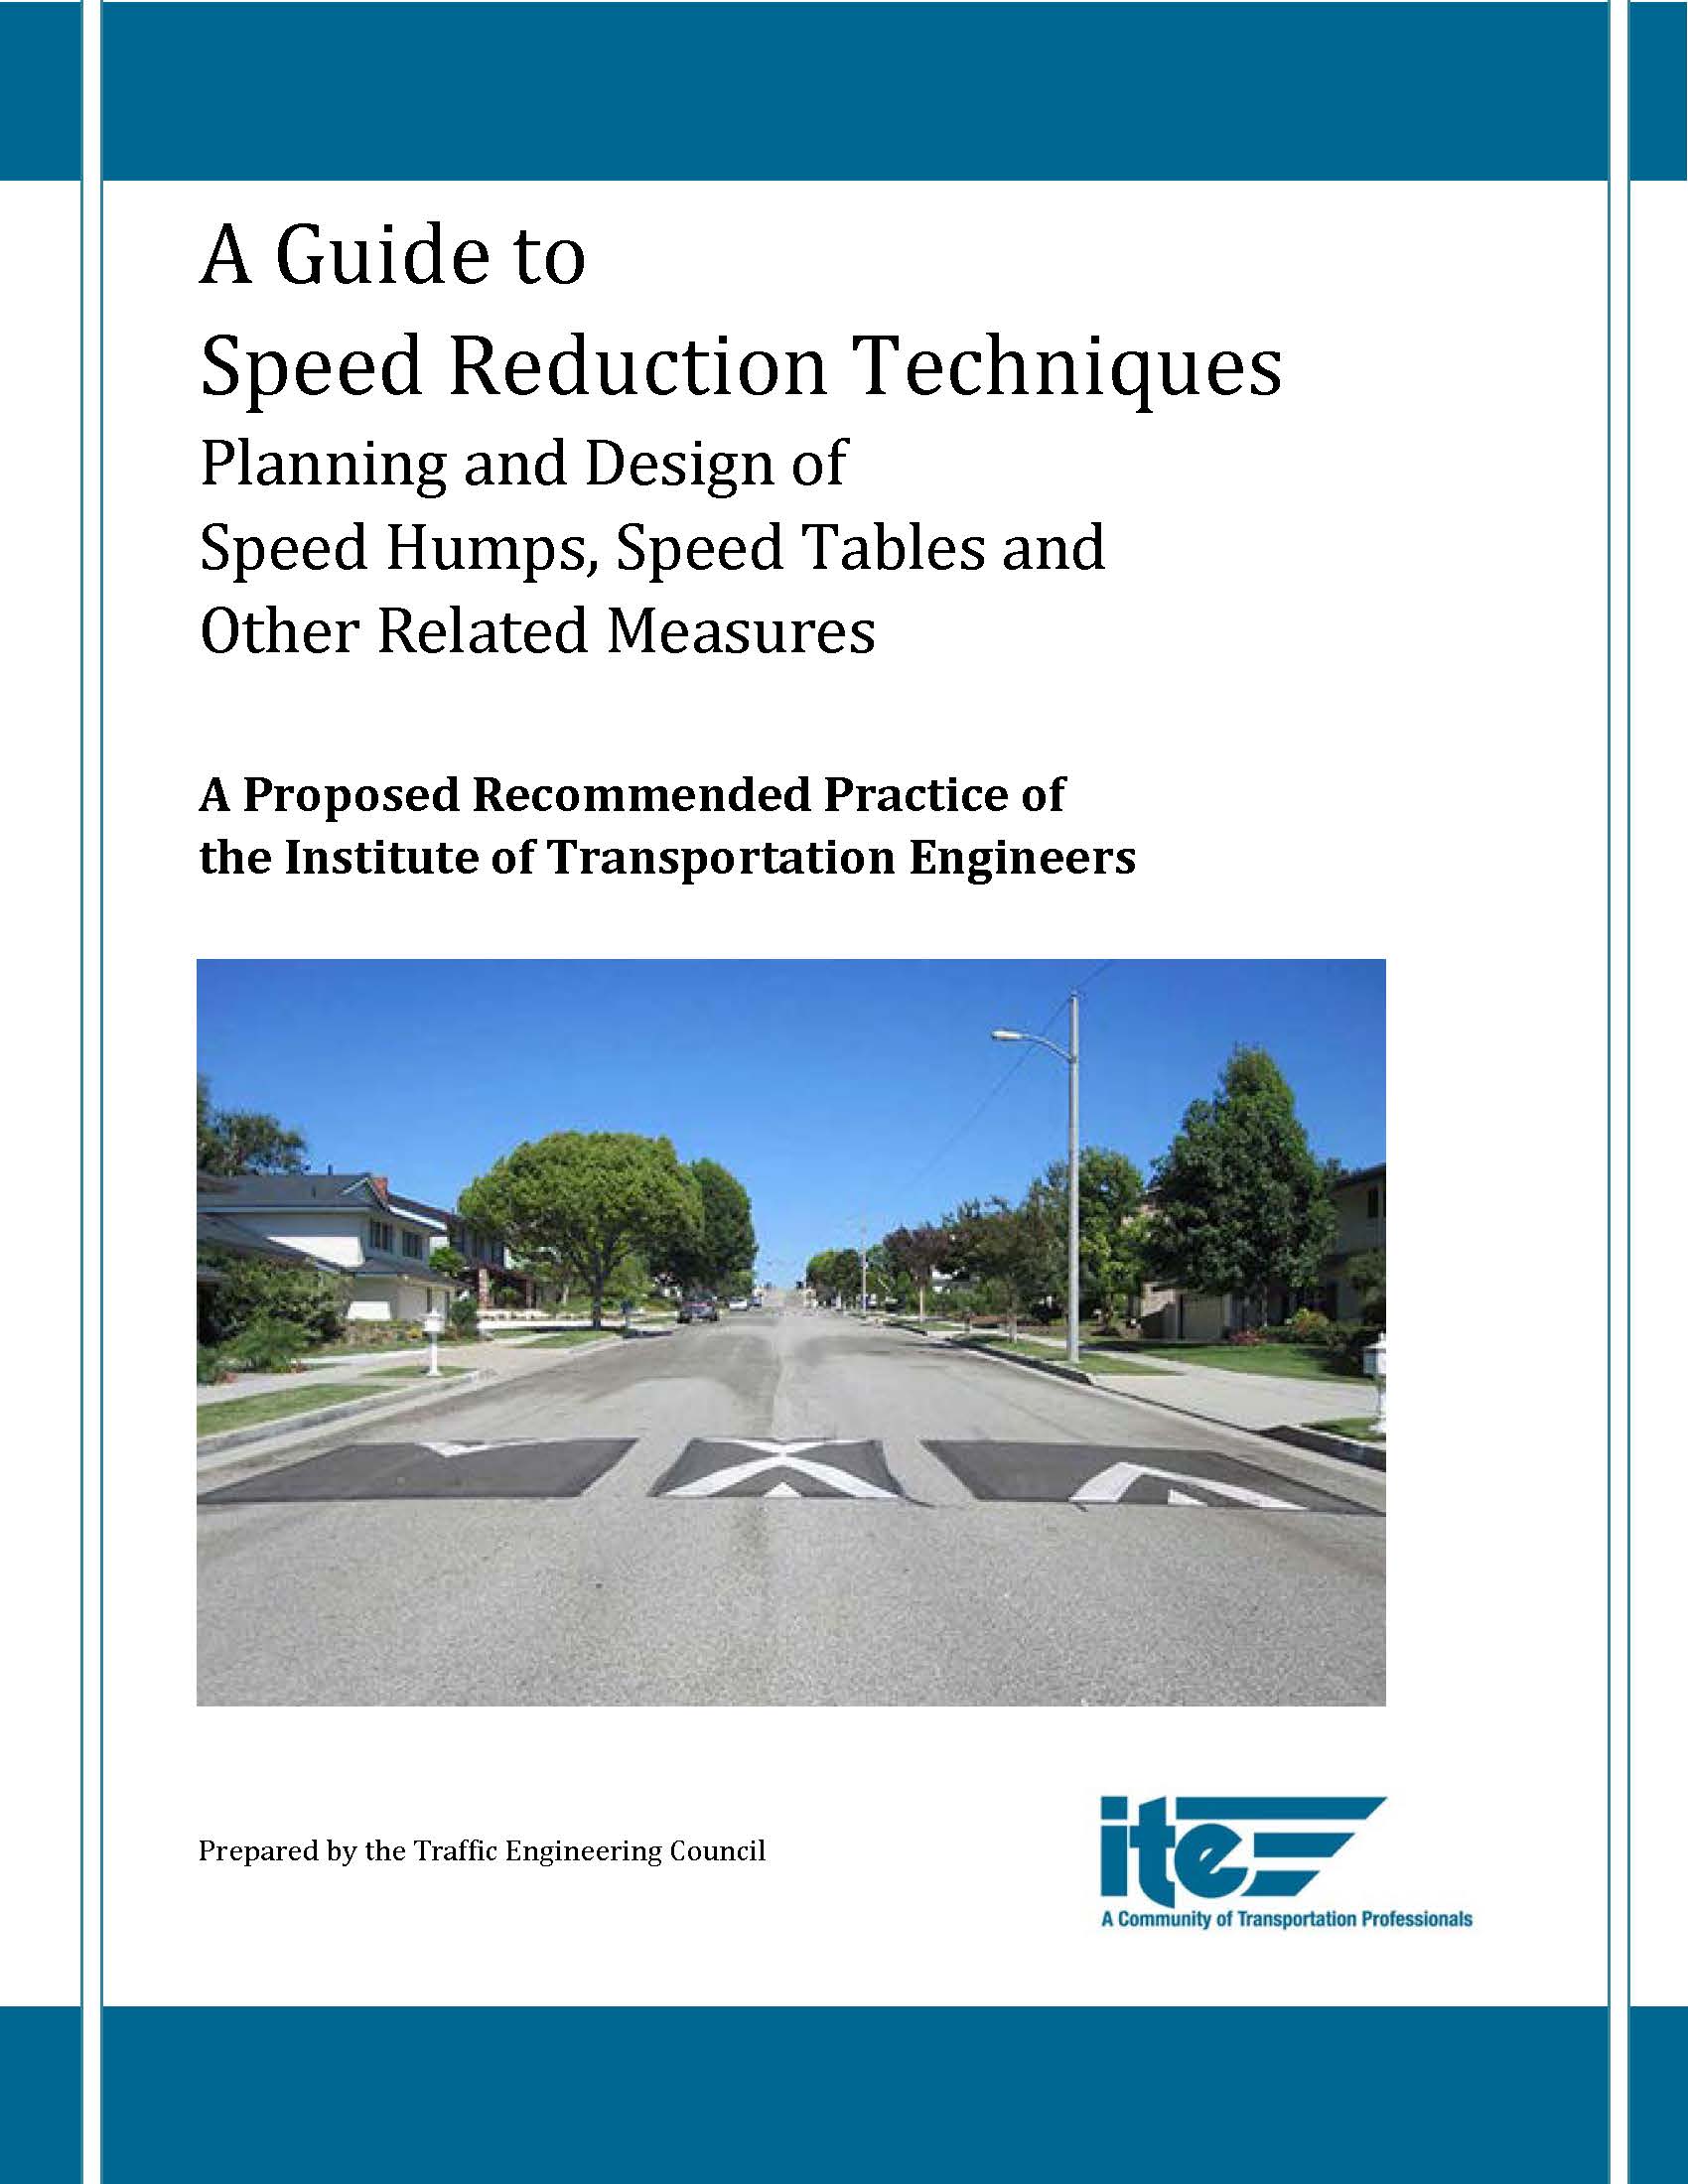 Speed Reduction Techniques - A Proposed Recommended Practice